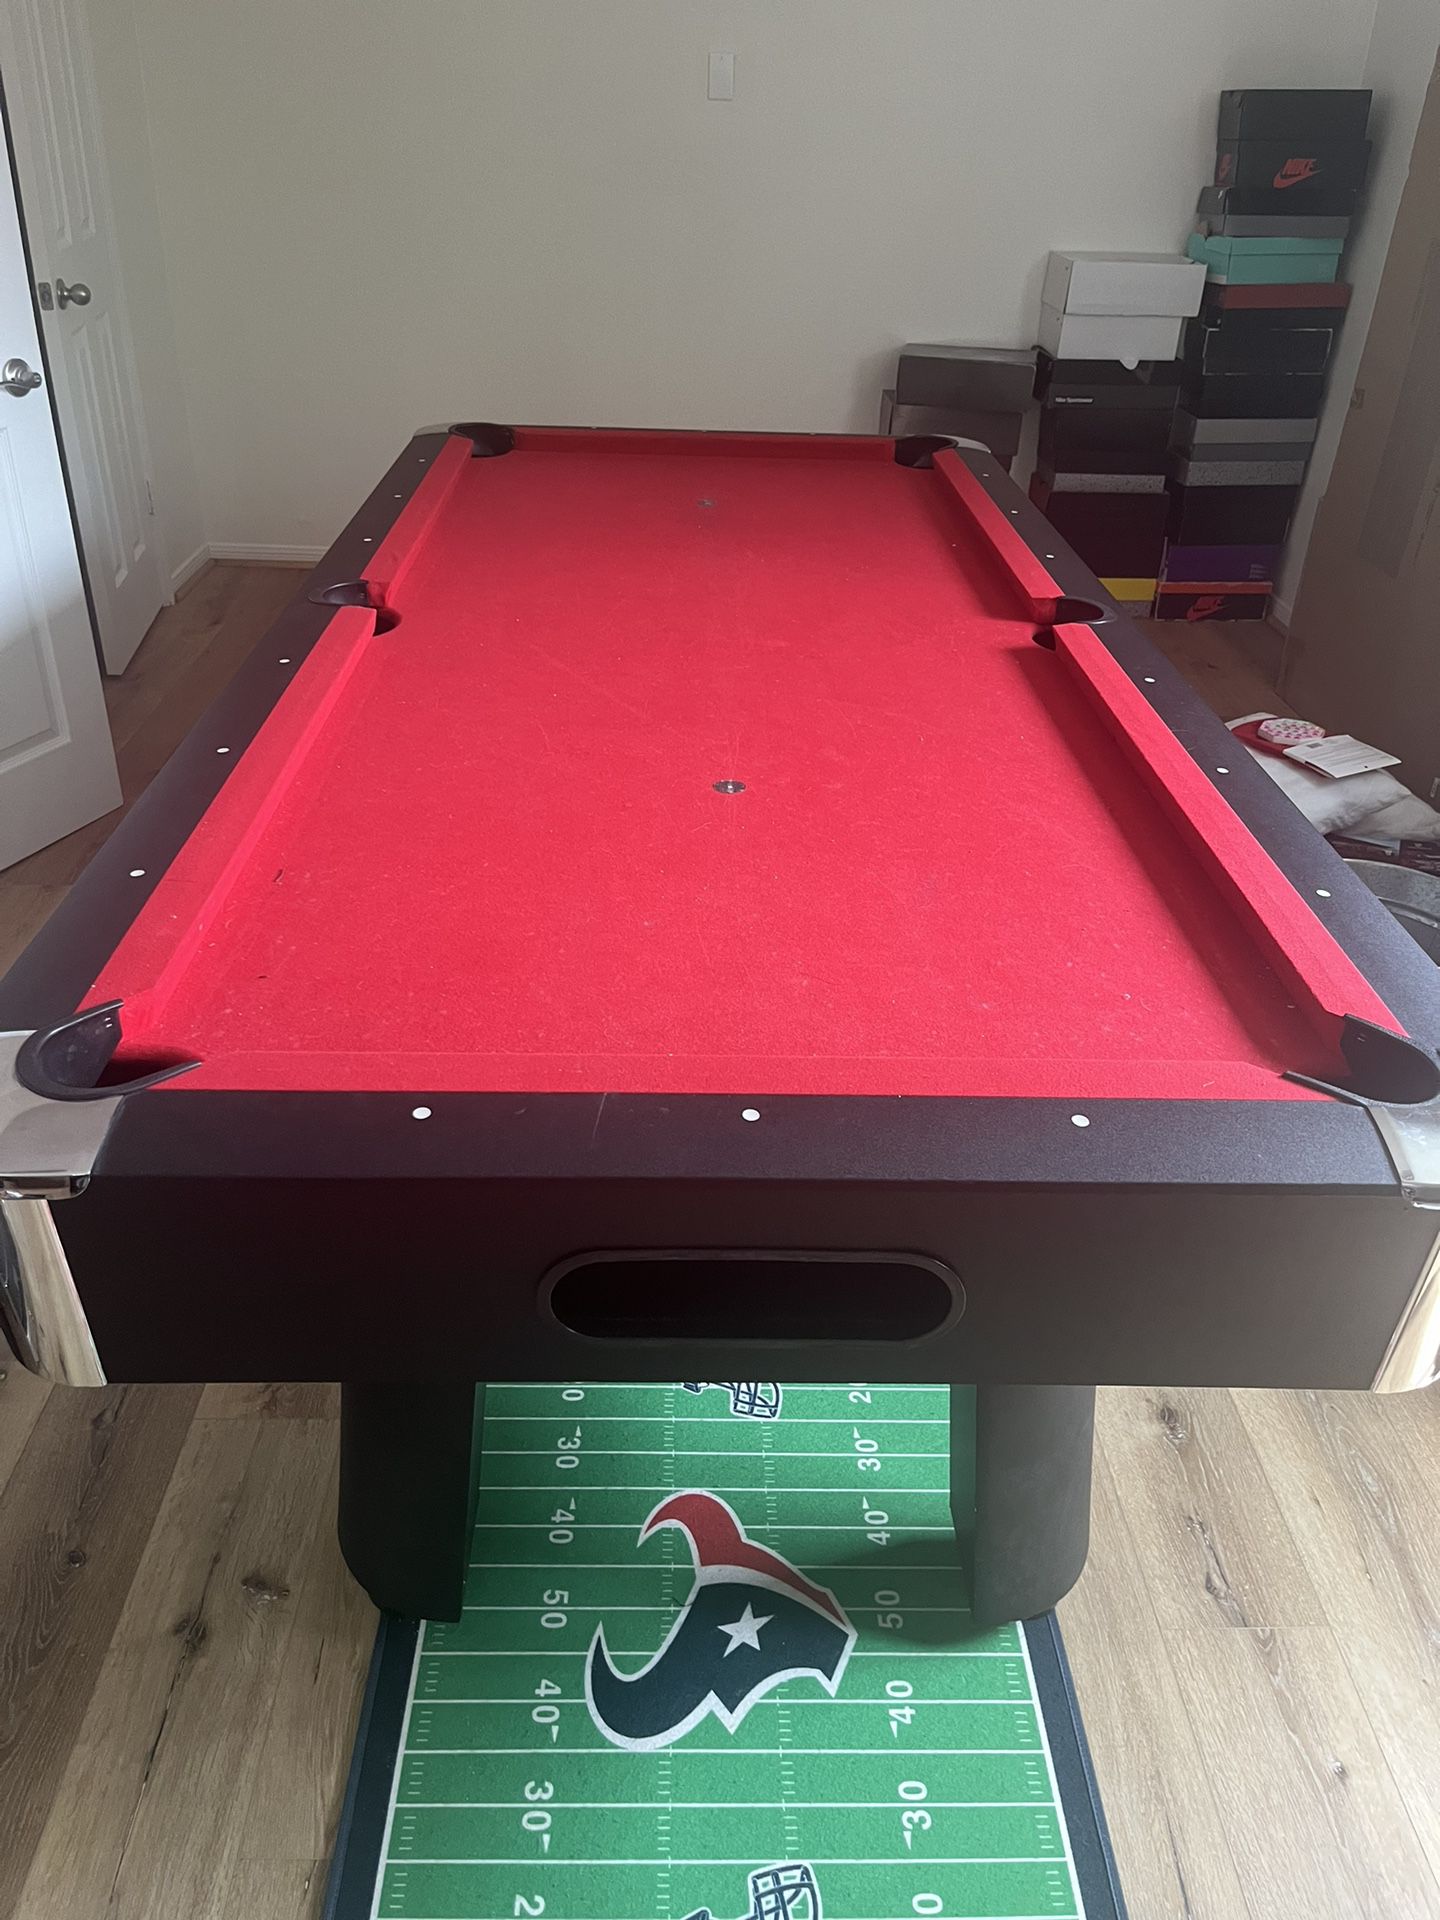 8 Ft Pool Table